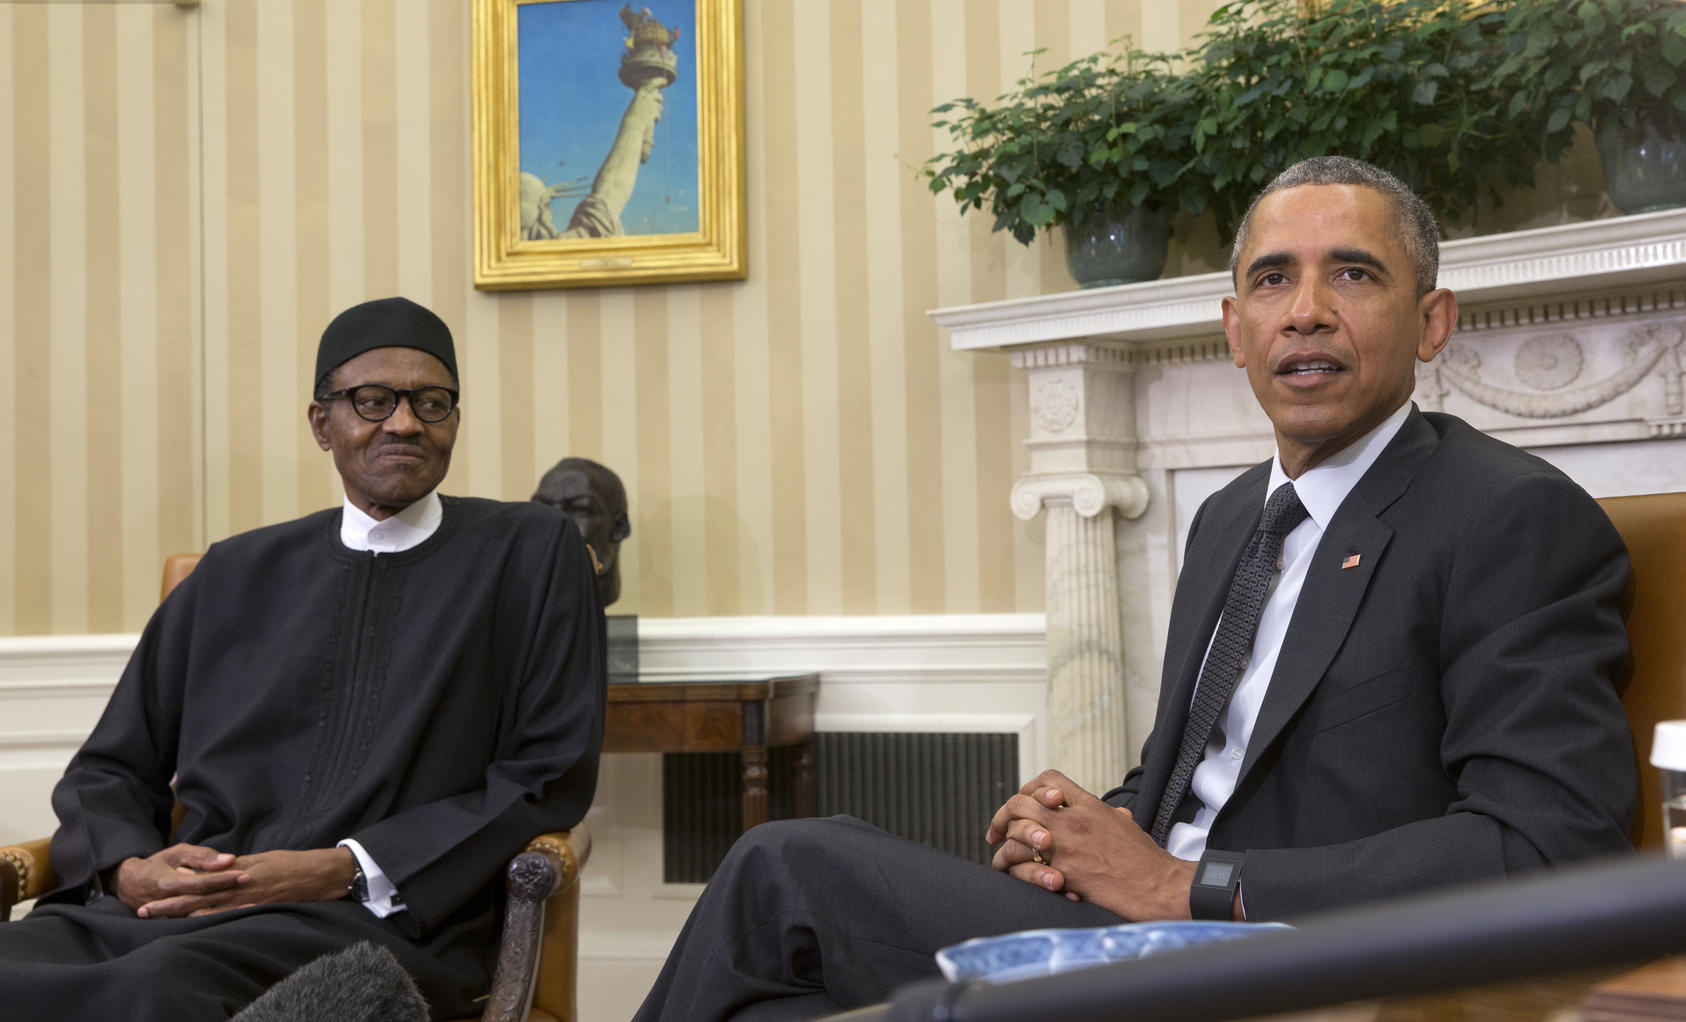 Nigerian President Muhammadu Buhari and President Barack Obama during a meeting in the Oval Office at the White House in Washington, July 20, 2015. Buhari met with Obama to strengthen relations and to discuss the fight against Boko Haram, an Islamic extremist group carrying out deadly rampages across northern Nigeria.